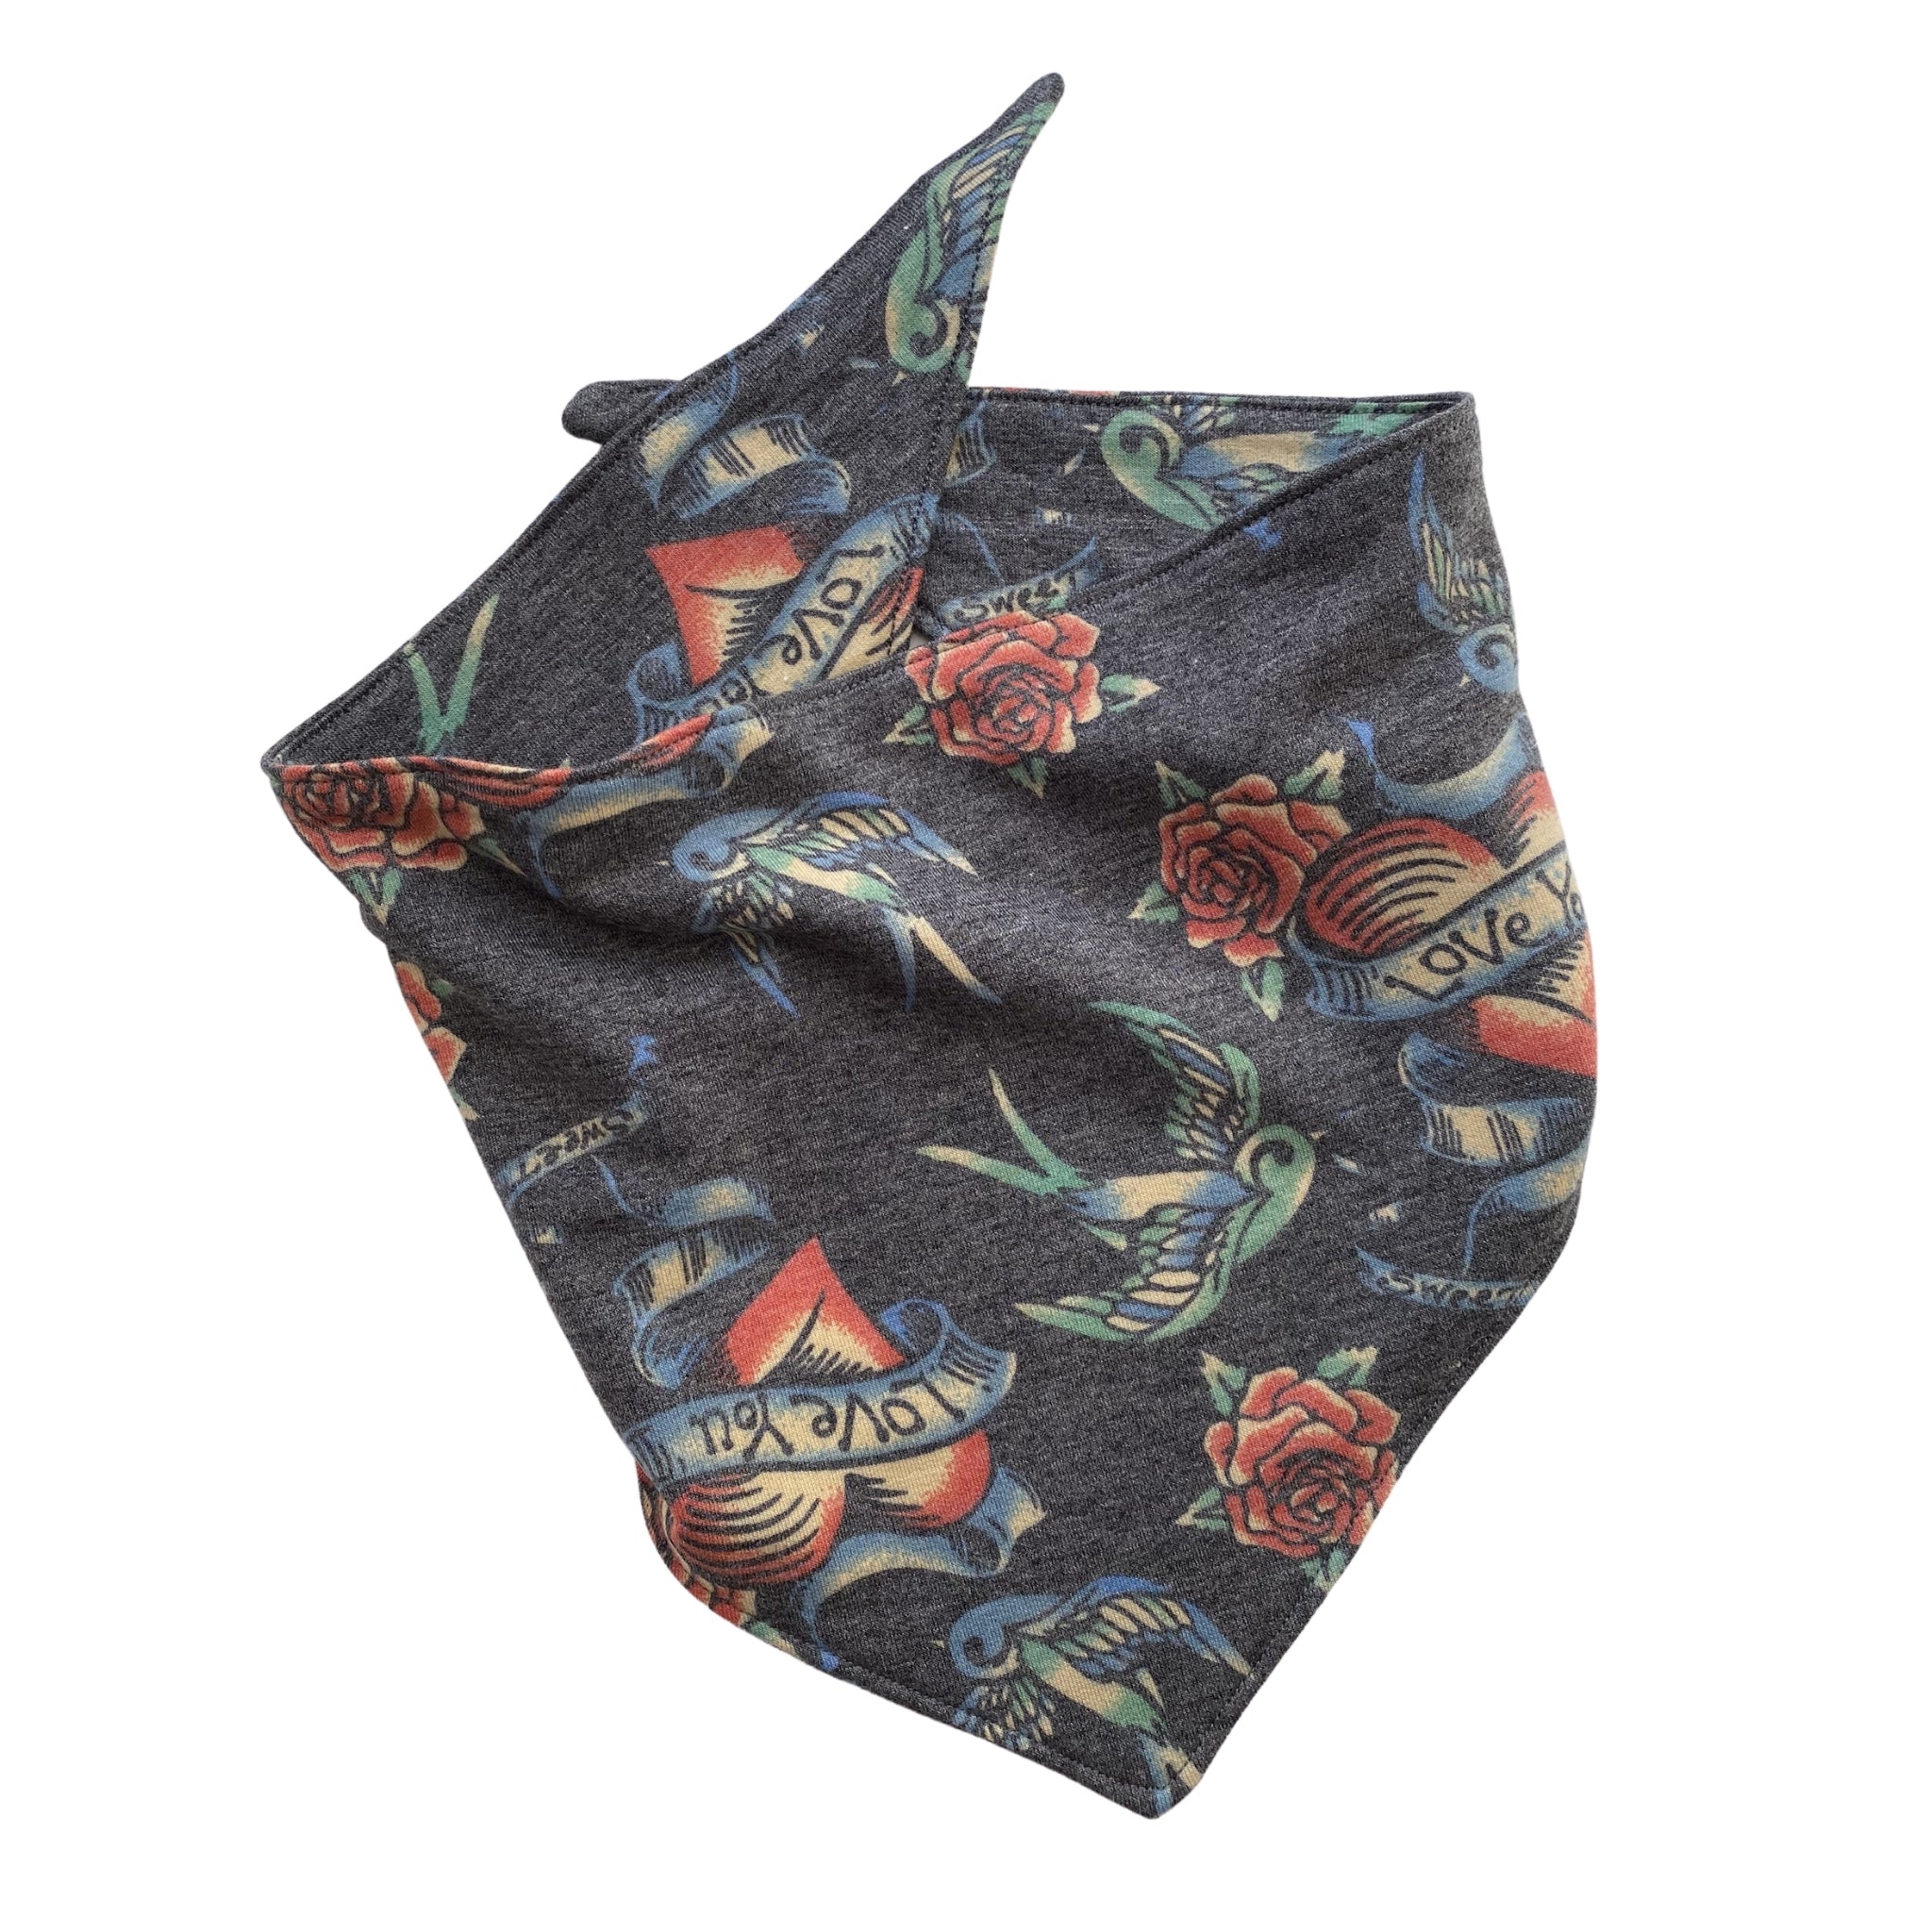 Tattoo love with doves and roses on soft black scARF bandana